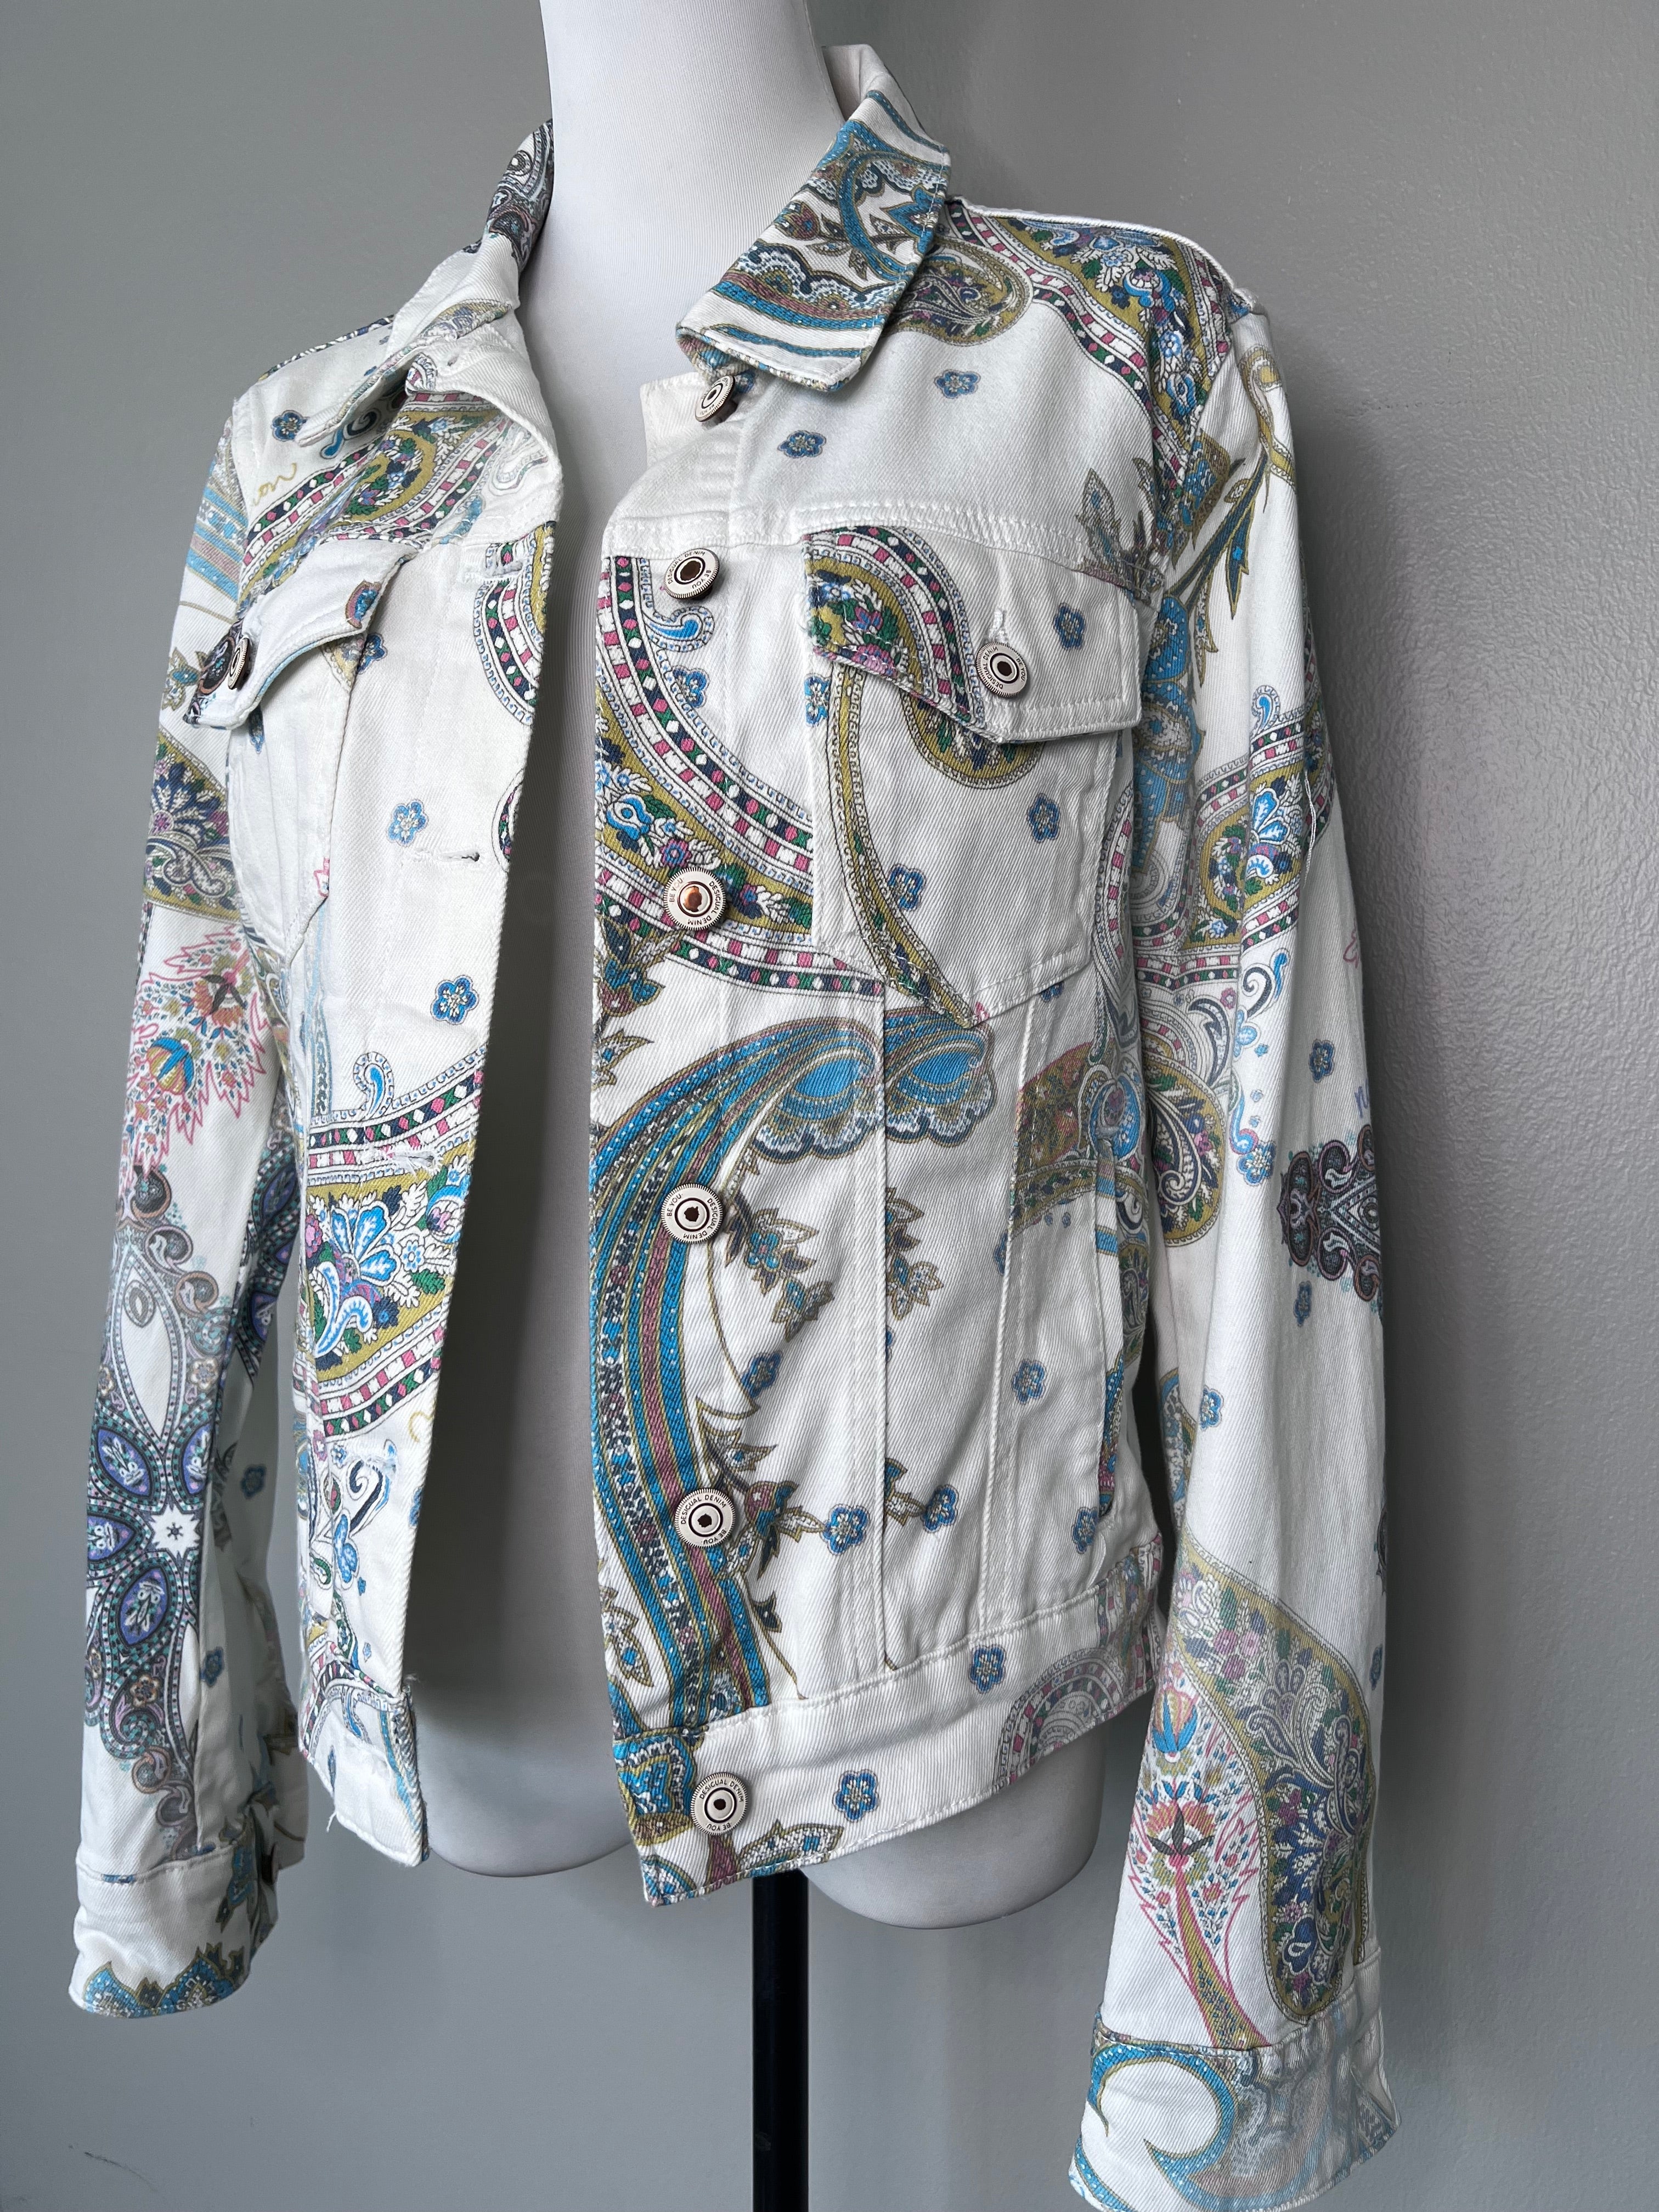 White denim jacket with multicolored bandana design throughout and buttons down the middle- DESIGUAL.